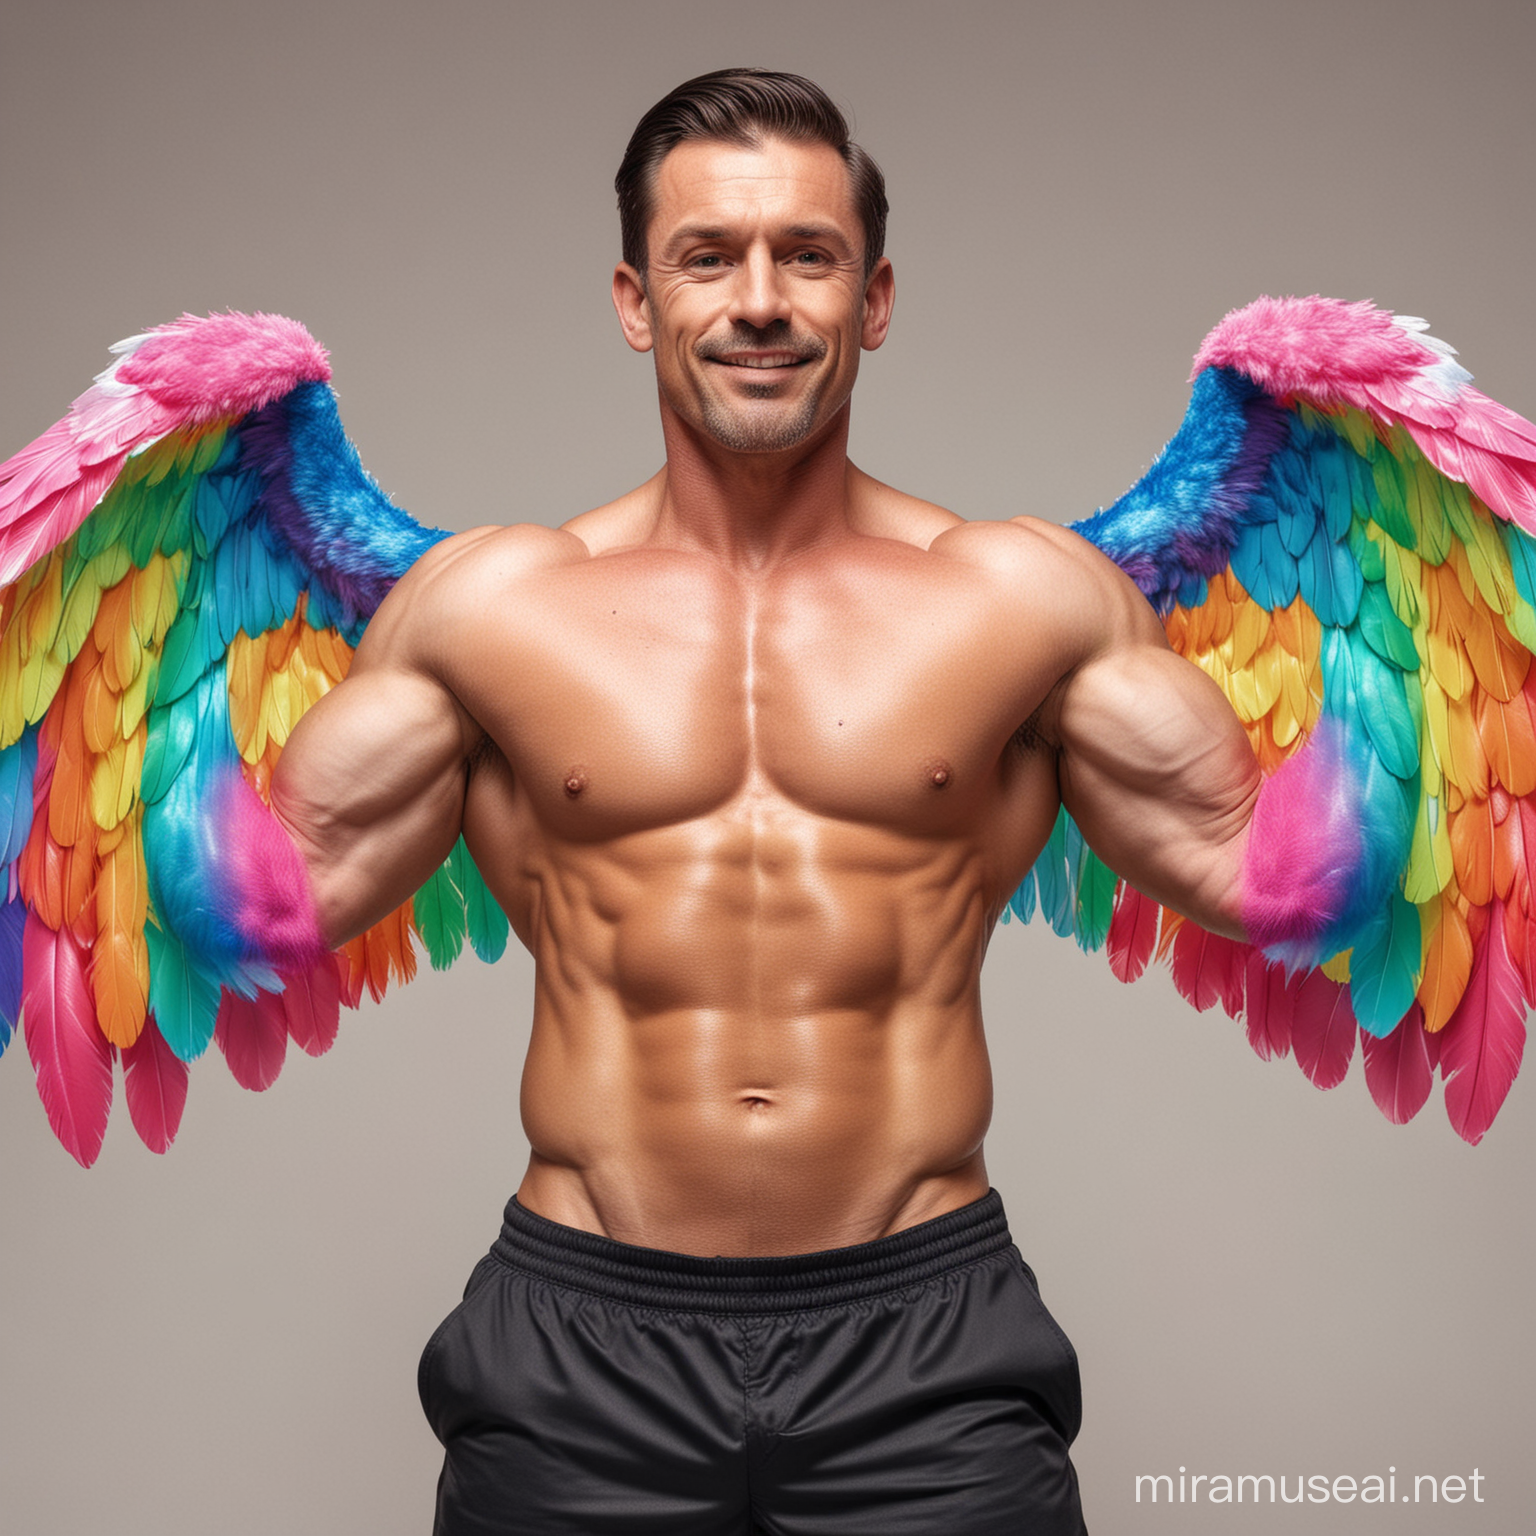 Topless 40s Ultra Beefy IFBB Bodybuilder Caucasian Man wearing Multi-Highlighter Bright Rainbow Coloured See Through Eagle Wings Jacket and Flexing Big Strong Arm with Doraemon